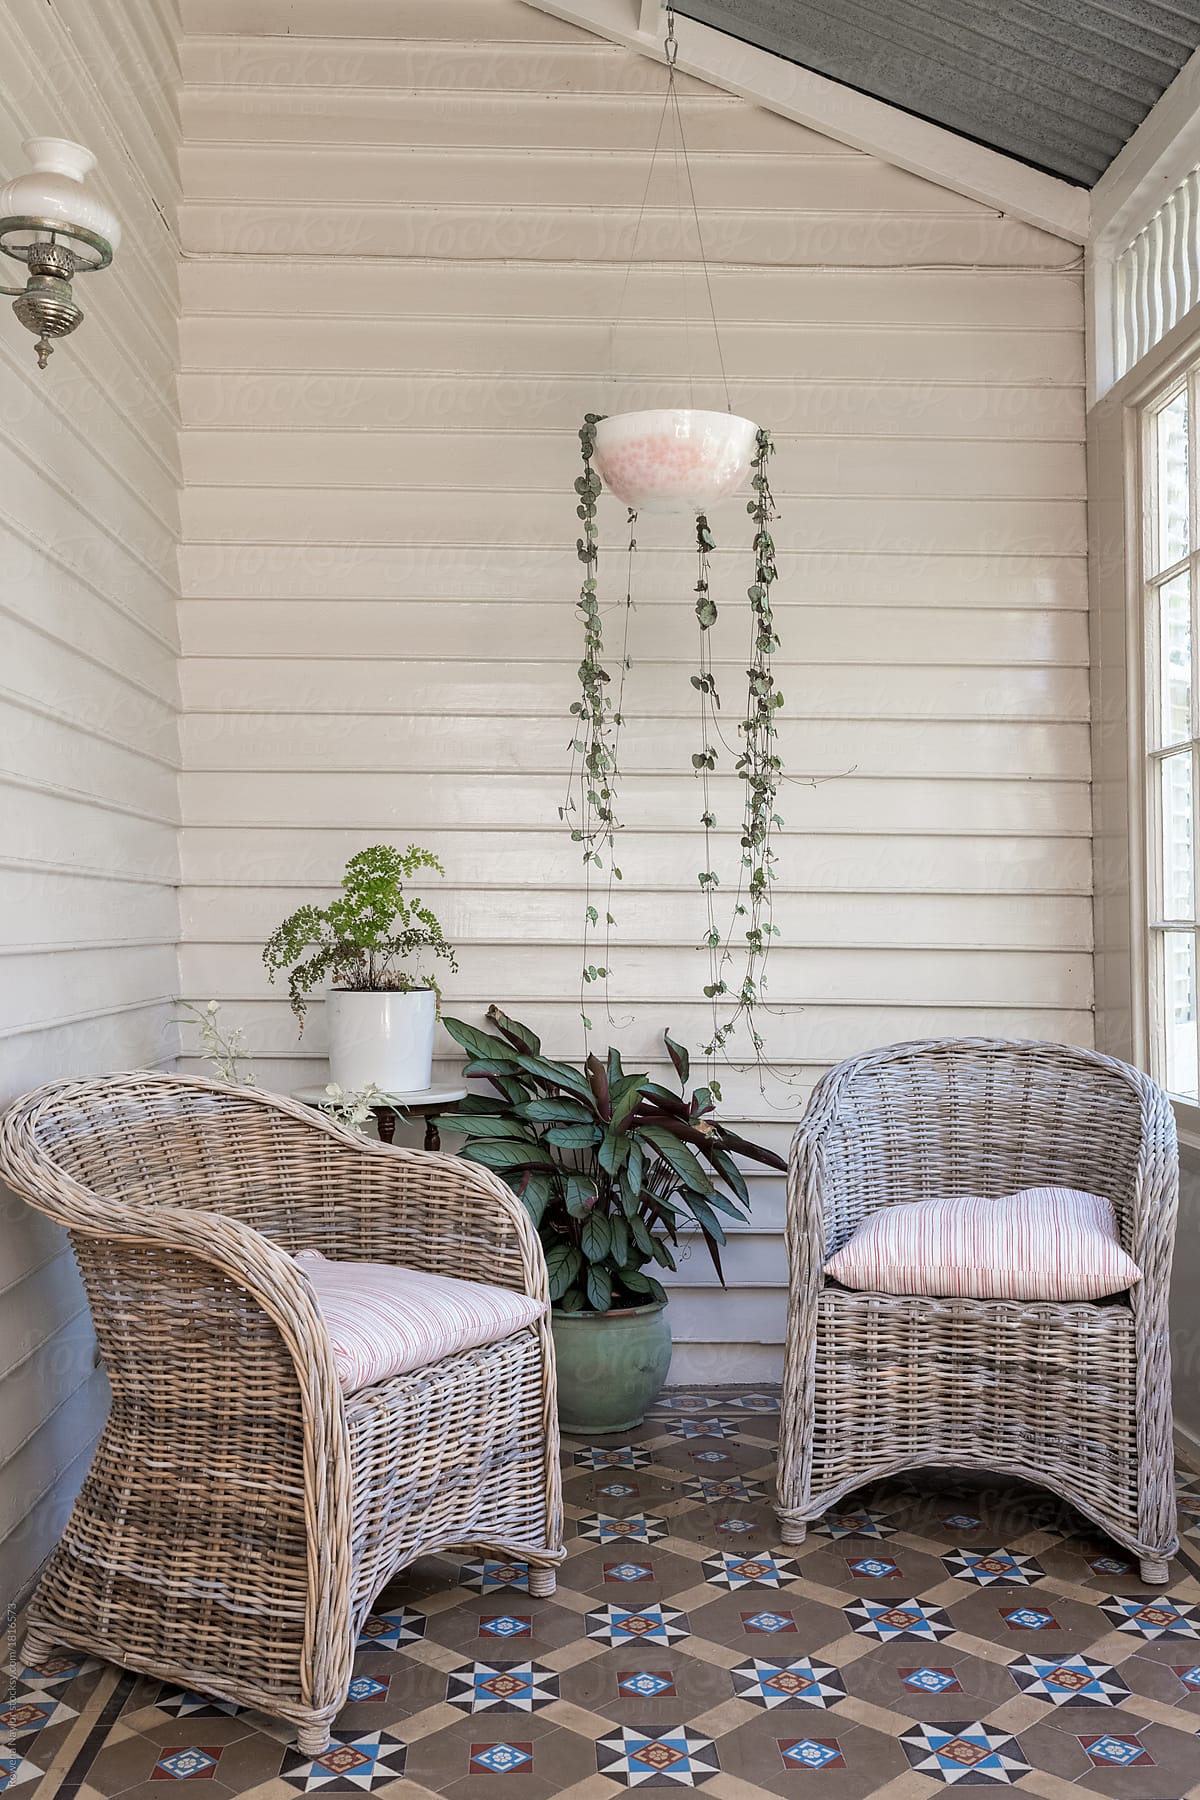 Cane chairs in summer conservatory of heritage home